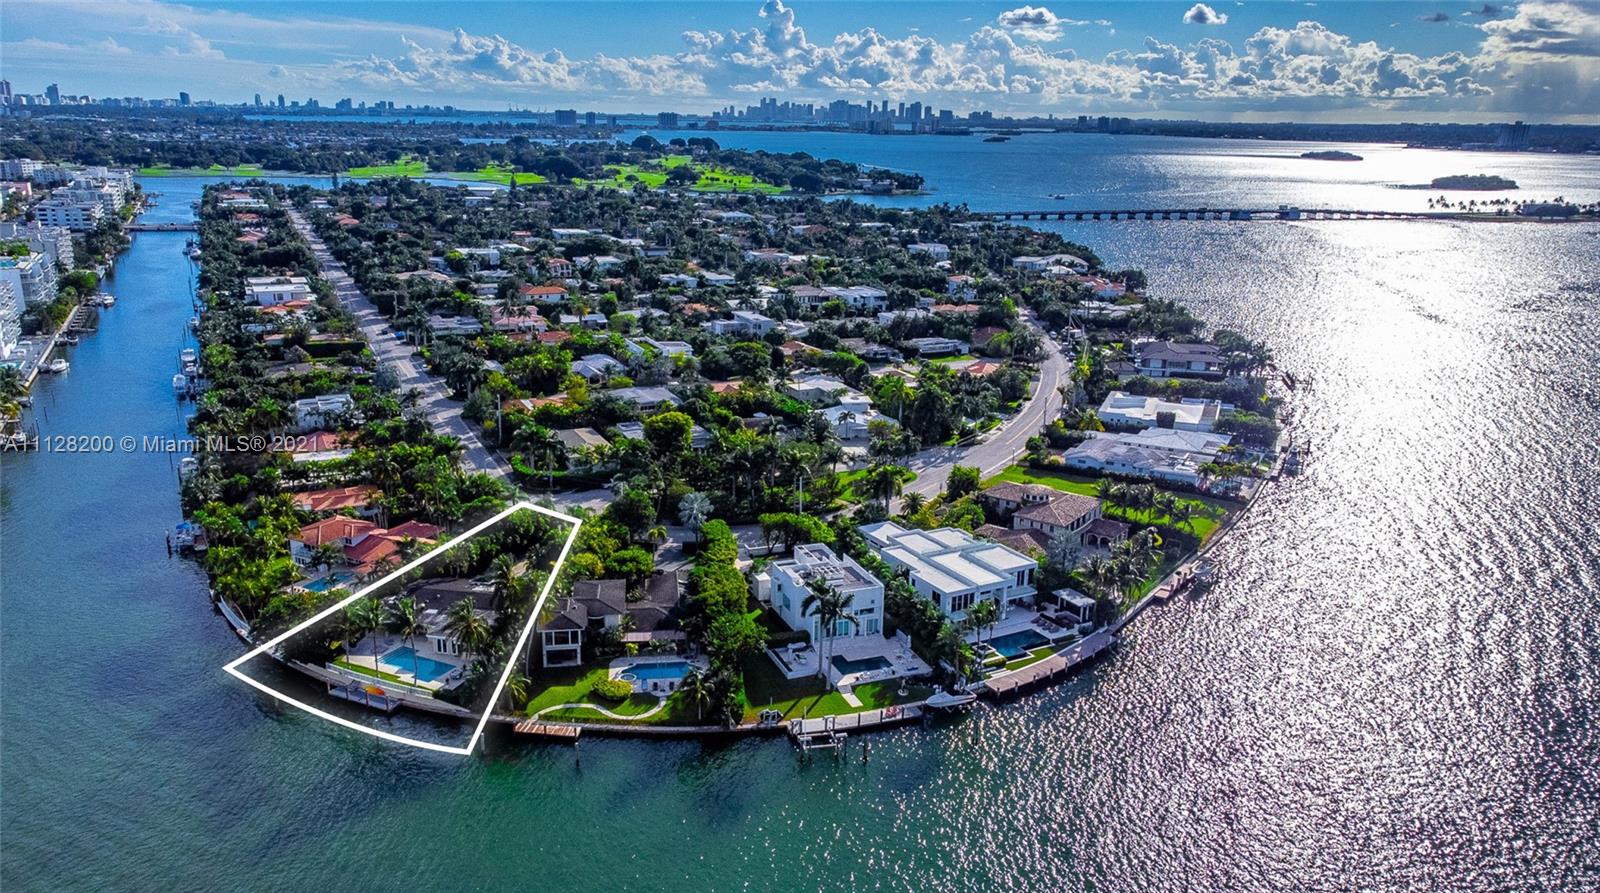 Wide bay residence on northern tip of Bay Harbor Island, situated on a 19,738 sf lot (largest waterfront lot for sale in BHI). 6bd/6.5ba + office, wonderful footprint w great bones & lots of natural light. Chefs Kitchen w Sub Zero refrigerator, Thermador double oven, 6 Burner gas stove & beverage center. Bayside pool w summer kitchen & large covered patio extending your in/outdoor entertaining areas. Travertine & oak flrs, open concept living/family/dining. All impact windows/doors, 45kw Onan full house generator. Tons of exterior storage, security cameras, +/-2003 sea wall, large dock w power for 50+ft boat, direct ocean access thru Haulover inlet within minutes. ALL you need is within walking distance: parks, Bal Harbour shops, beach, restaurants, houses of worship, schools. See video.